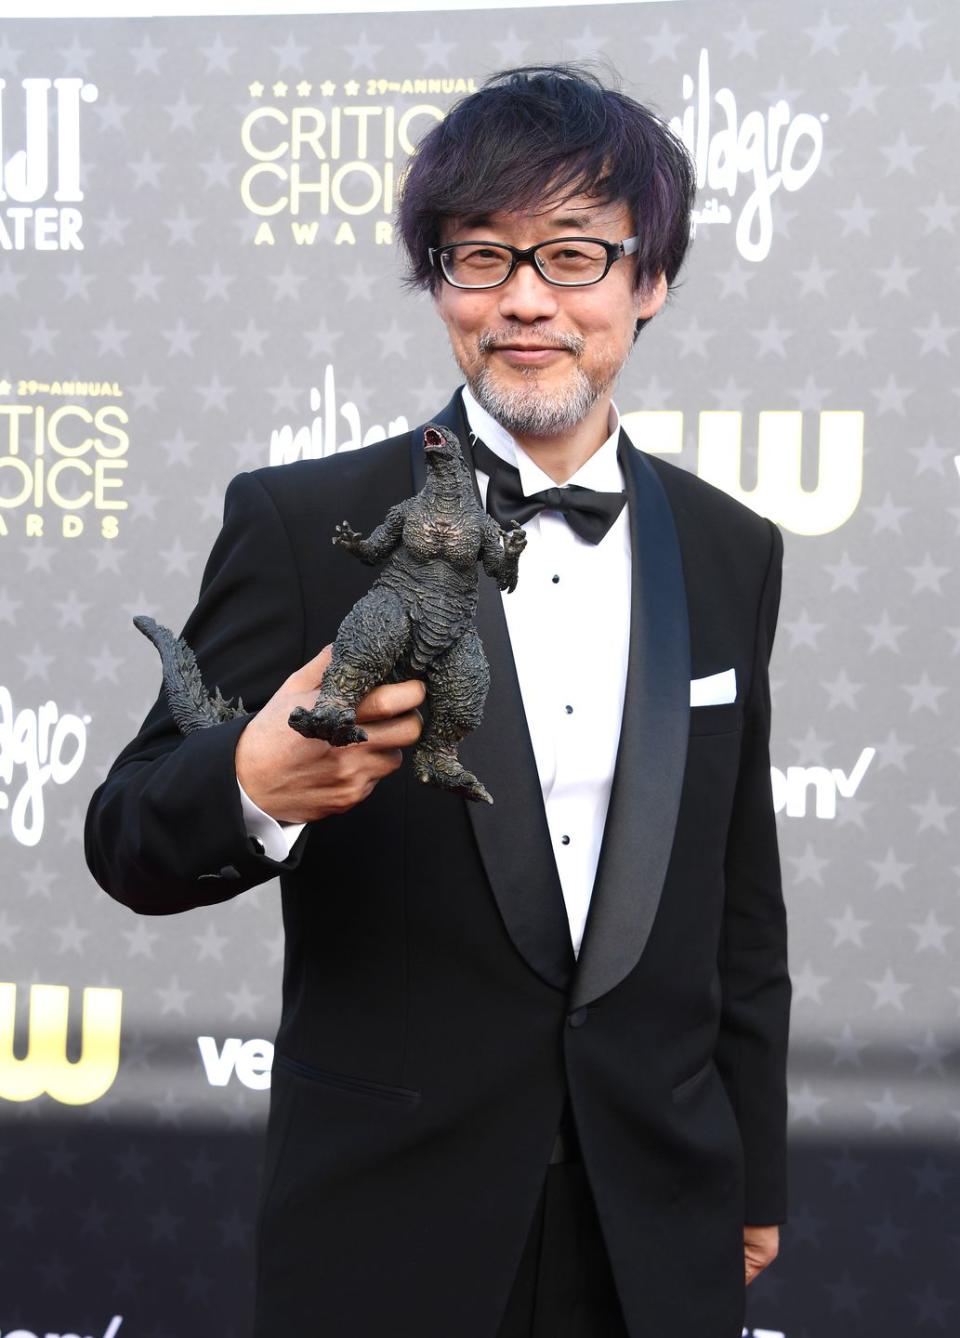 takashi yamazaki smiles at the camera and holds a godzilla figurine in front of him, he wears a black tuxedo and glasses